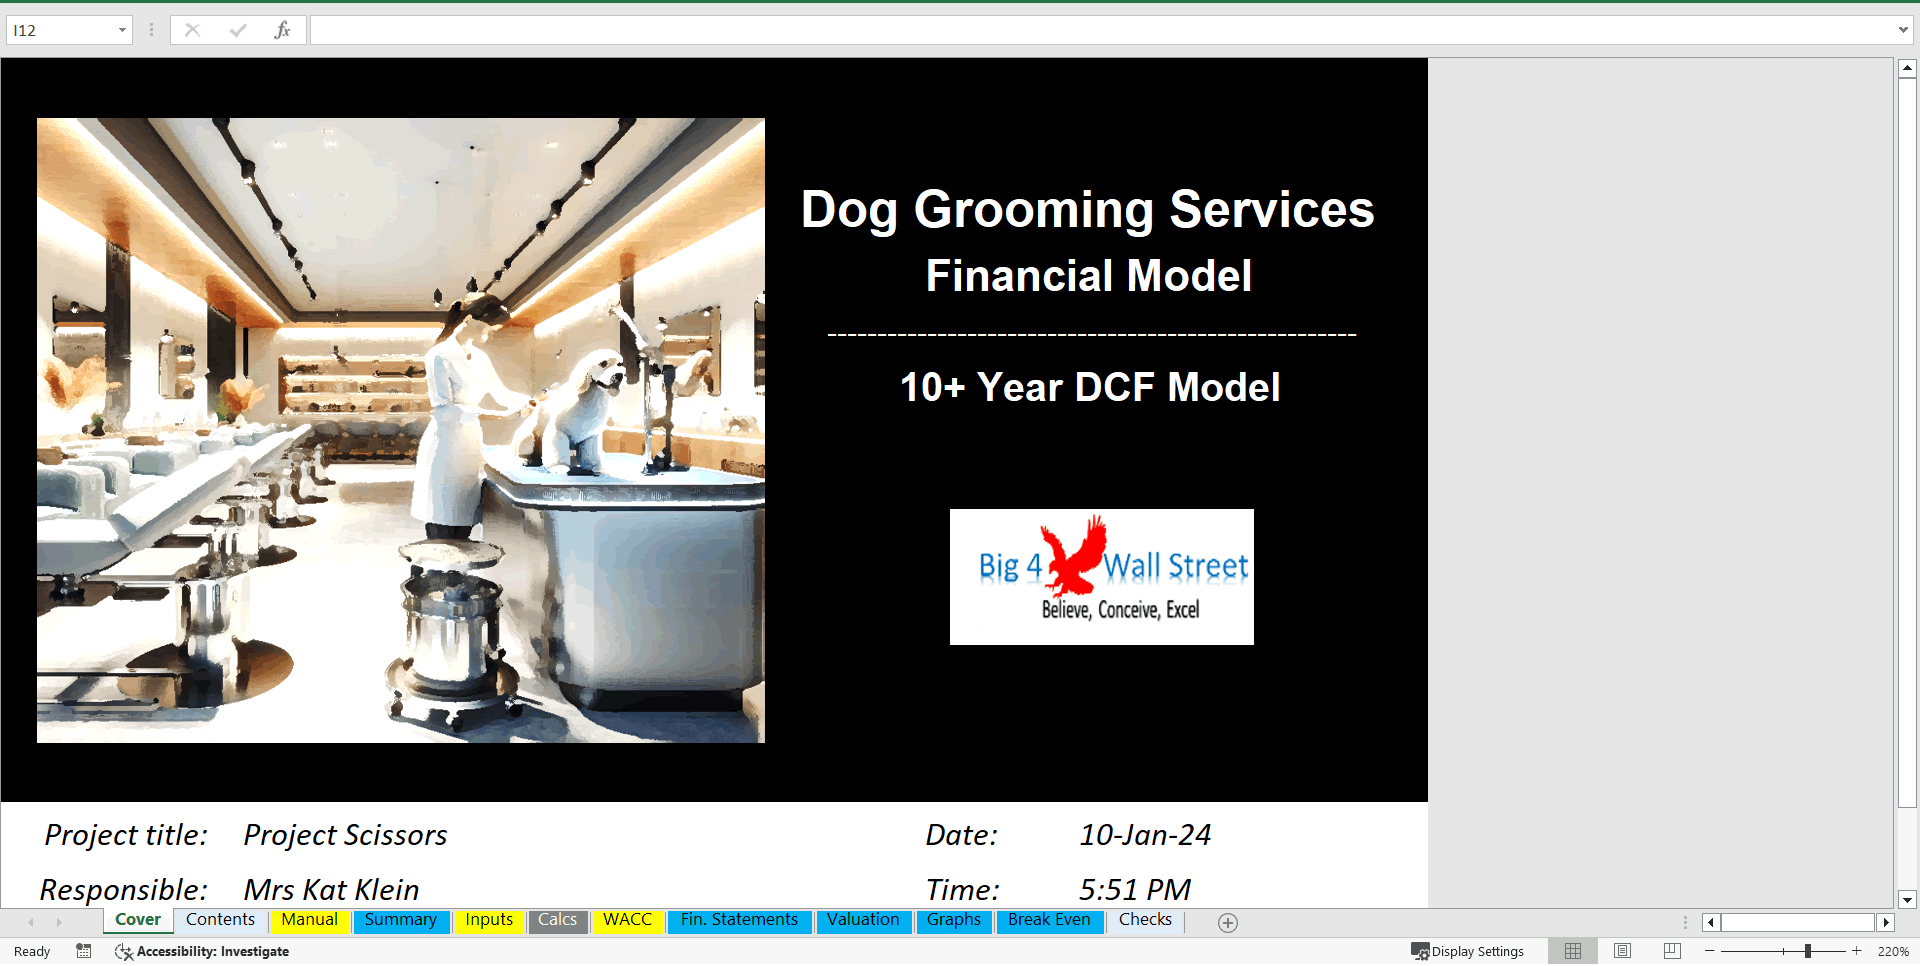 Dog Grooming Services Financial Model (10+ Year DCF and Valuation)